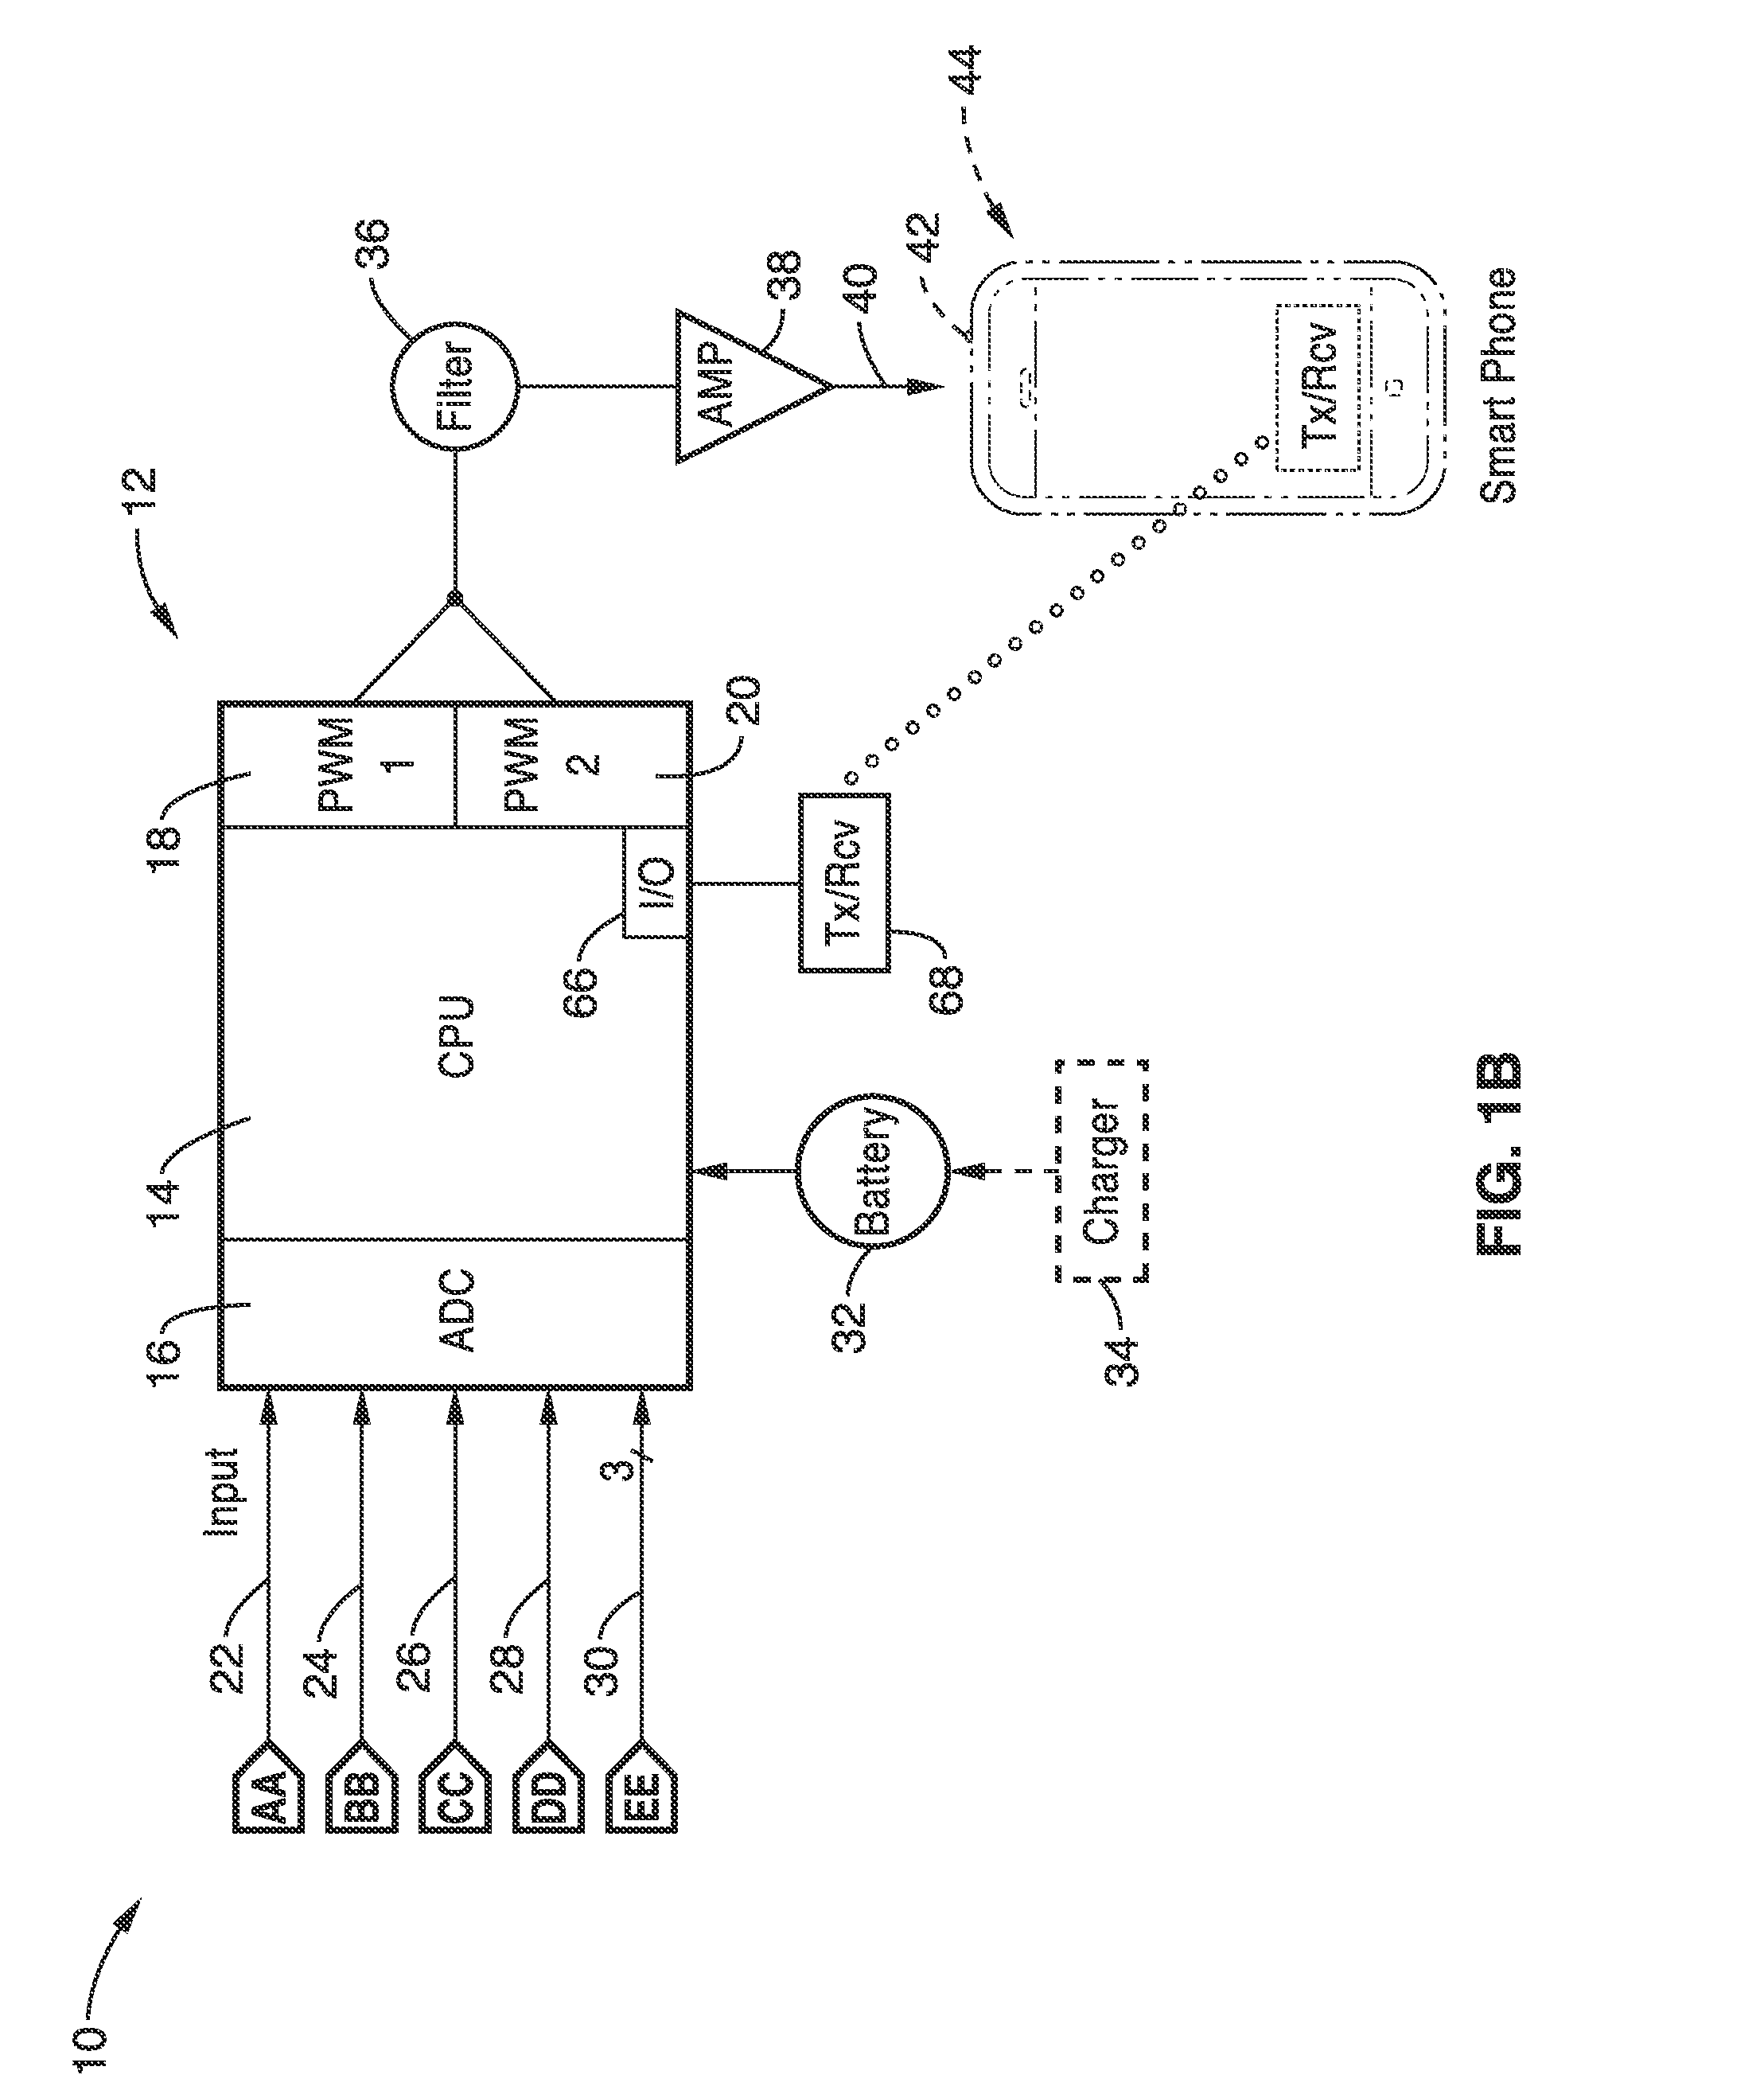 Biometric sensing and processing apparatus for mobile gaming, education, and wellness applications